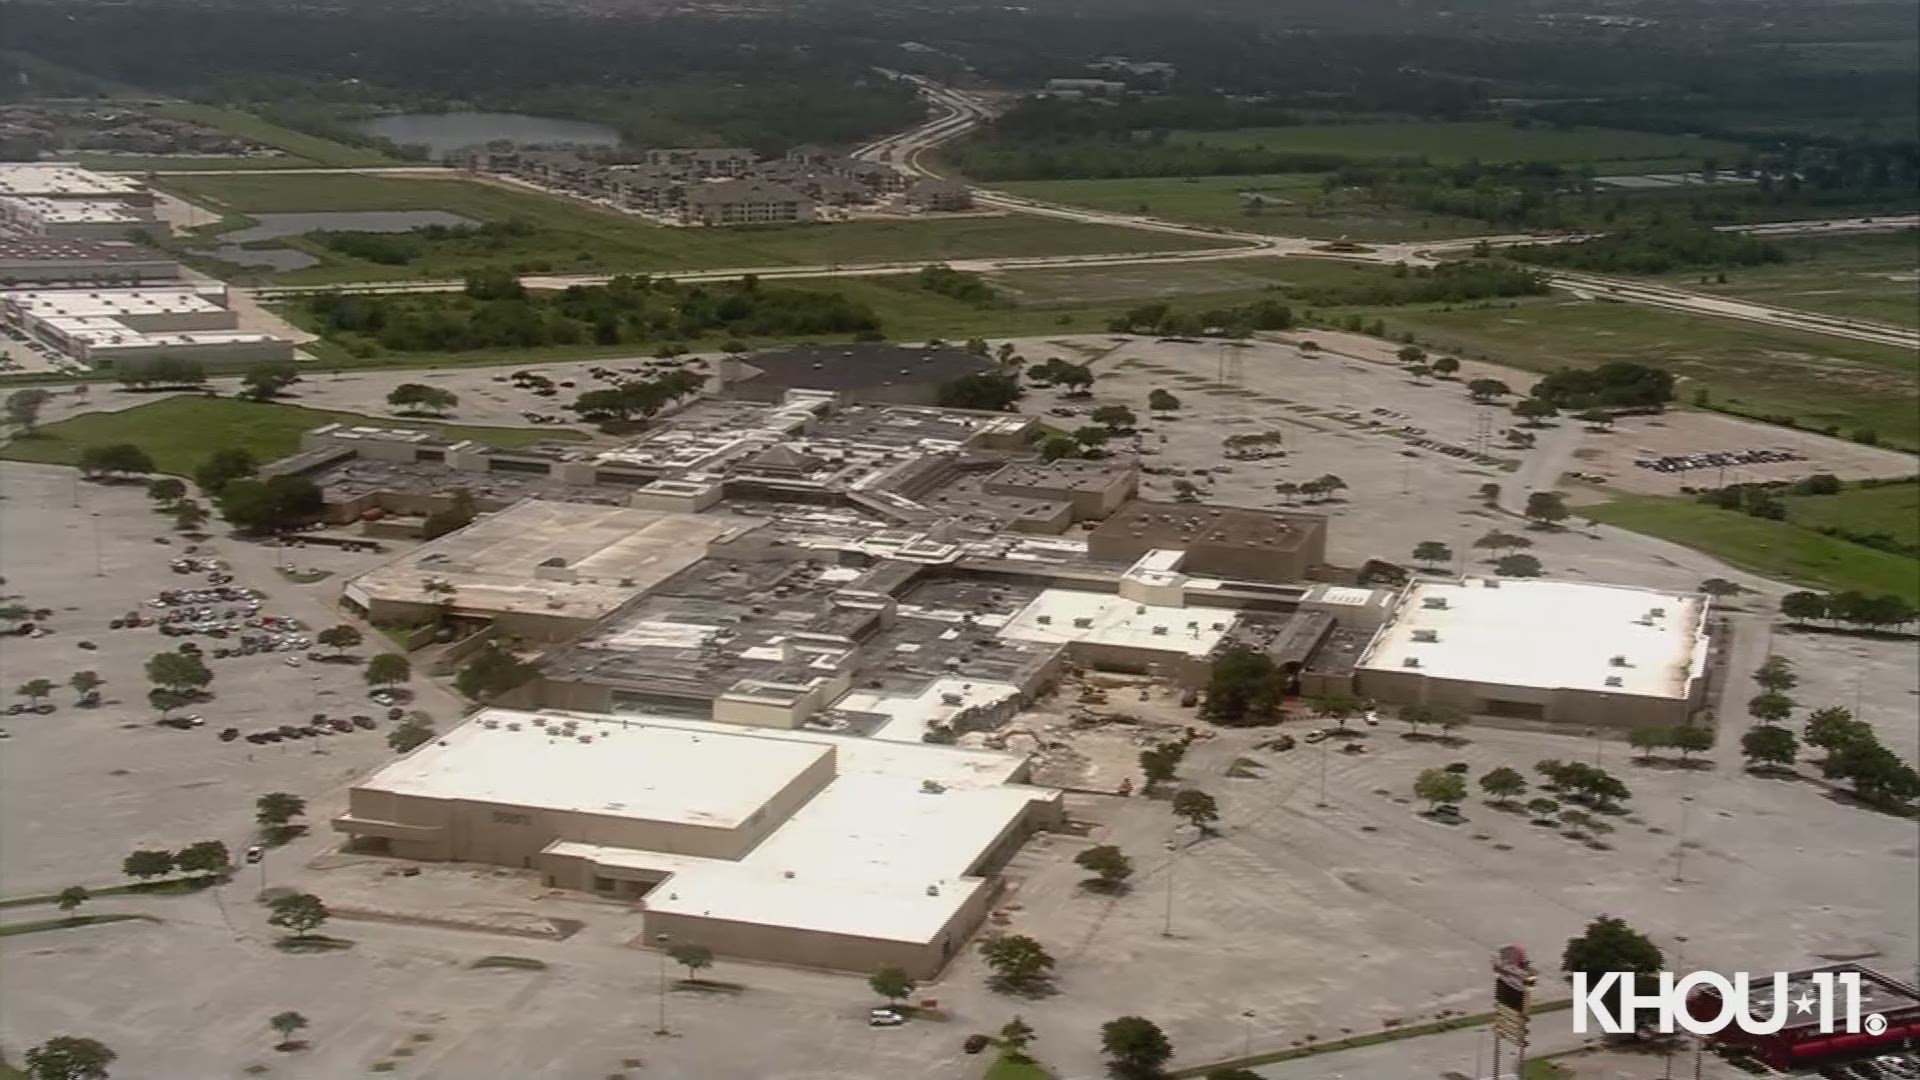 KHOU's Air11 helicopter was over the old San Jacinto Mall near Baytown as crews began demolishing the old structure.